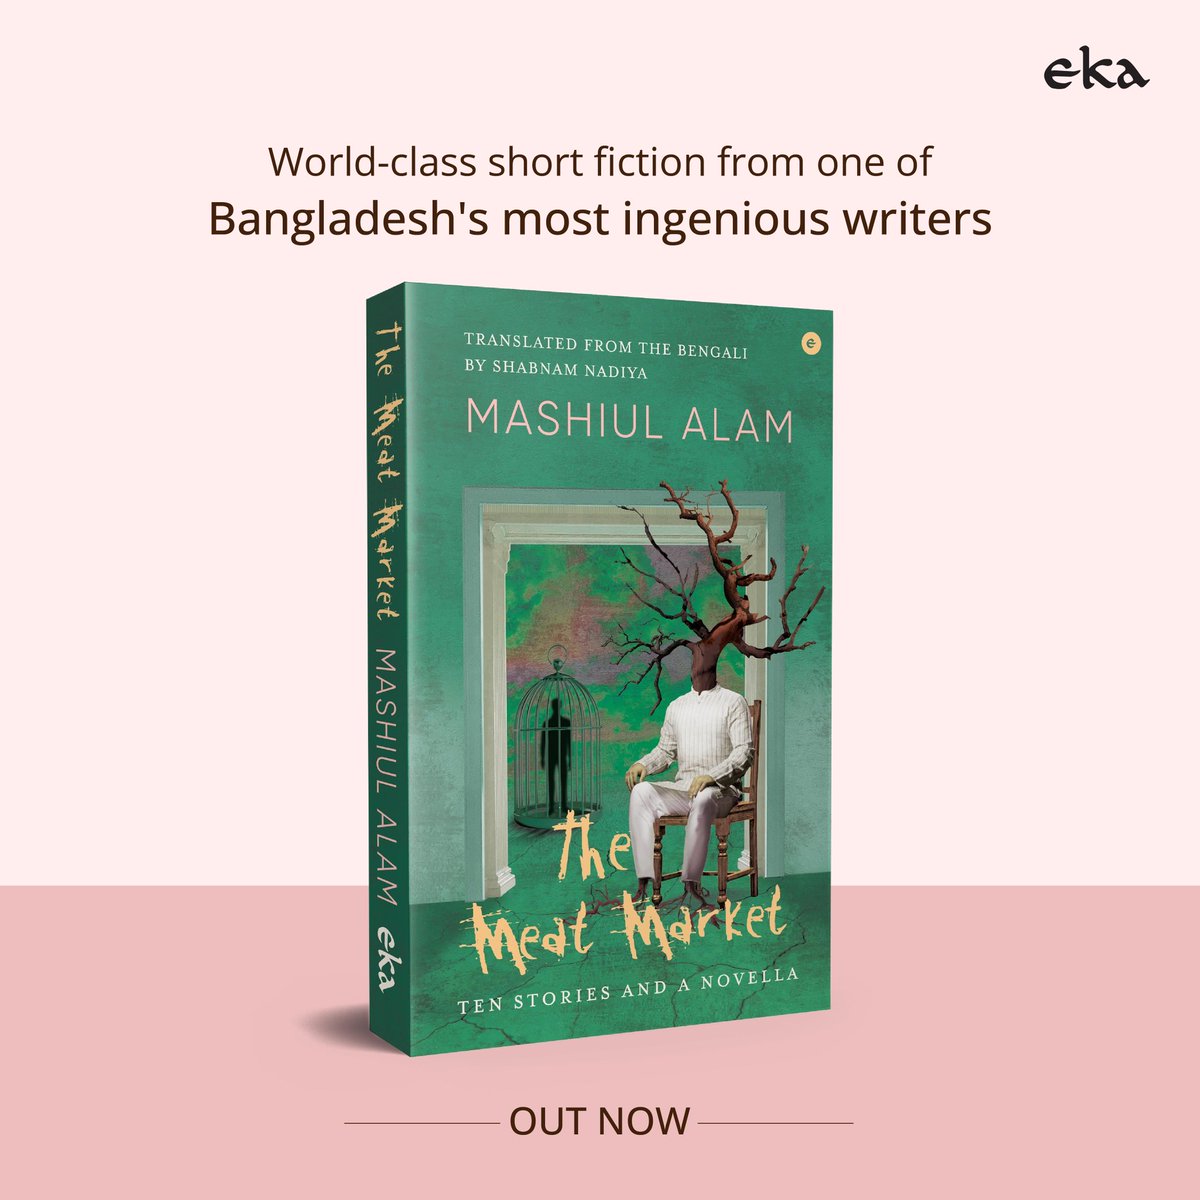 Intensely political and rendered in crystalline prose, #MashiulAlam's The Meat Market is a dazzling collection of stories, brilliantly translated by @nadiya_shabnam from Bengali to English. Now available at all bookstores and online. Buy your copy today. @EkaWestland